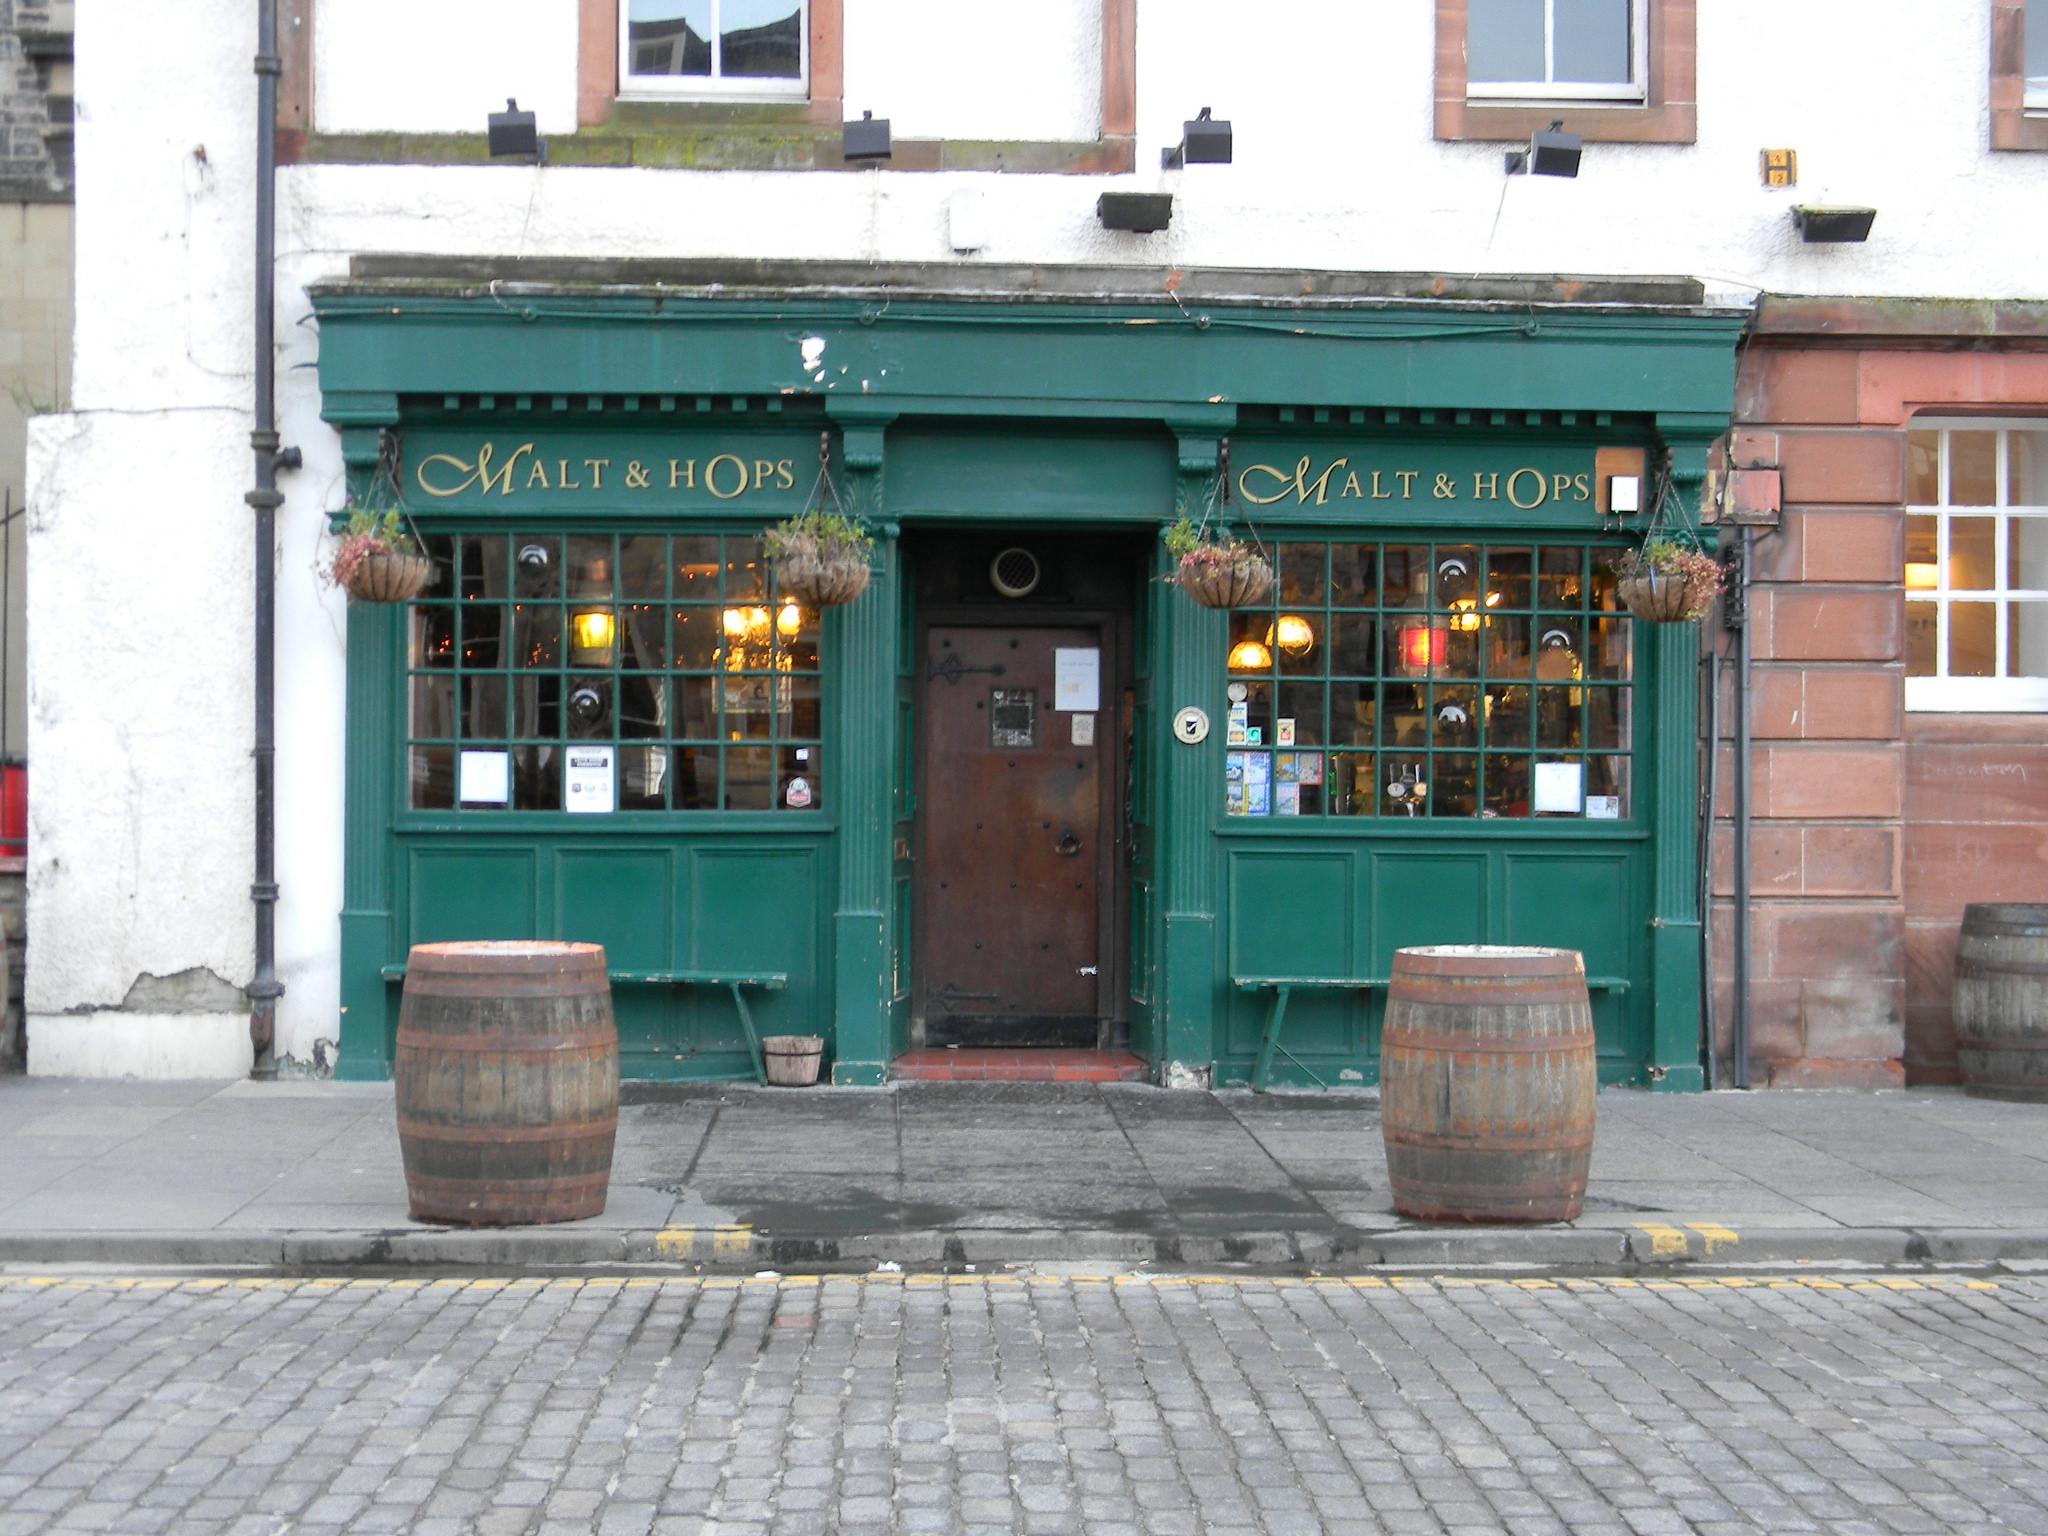 Cover image of this place Malt & Hops